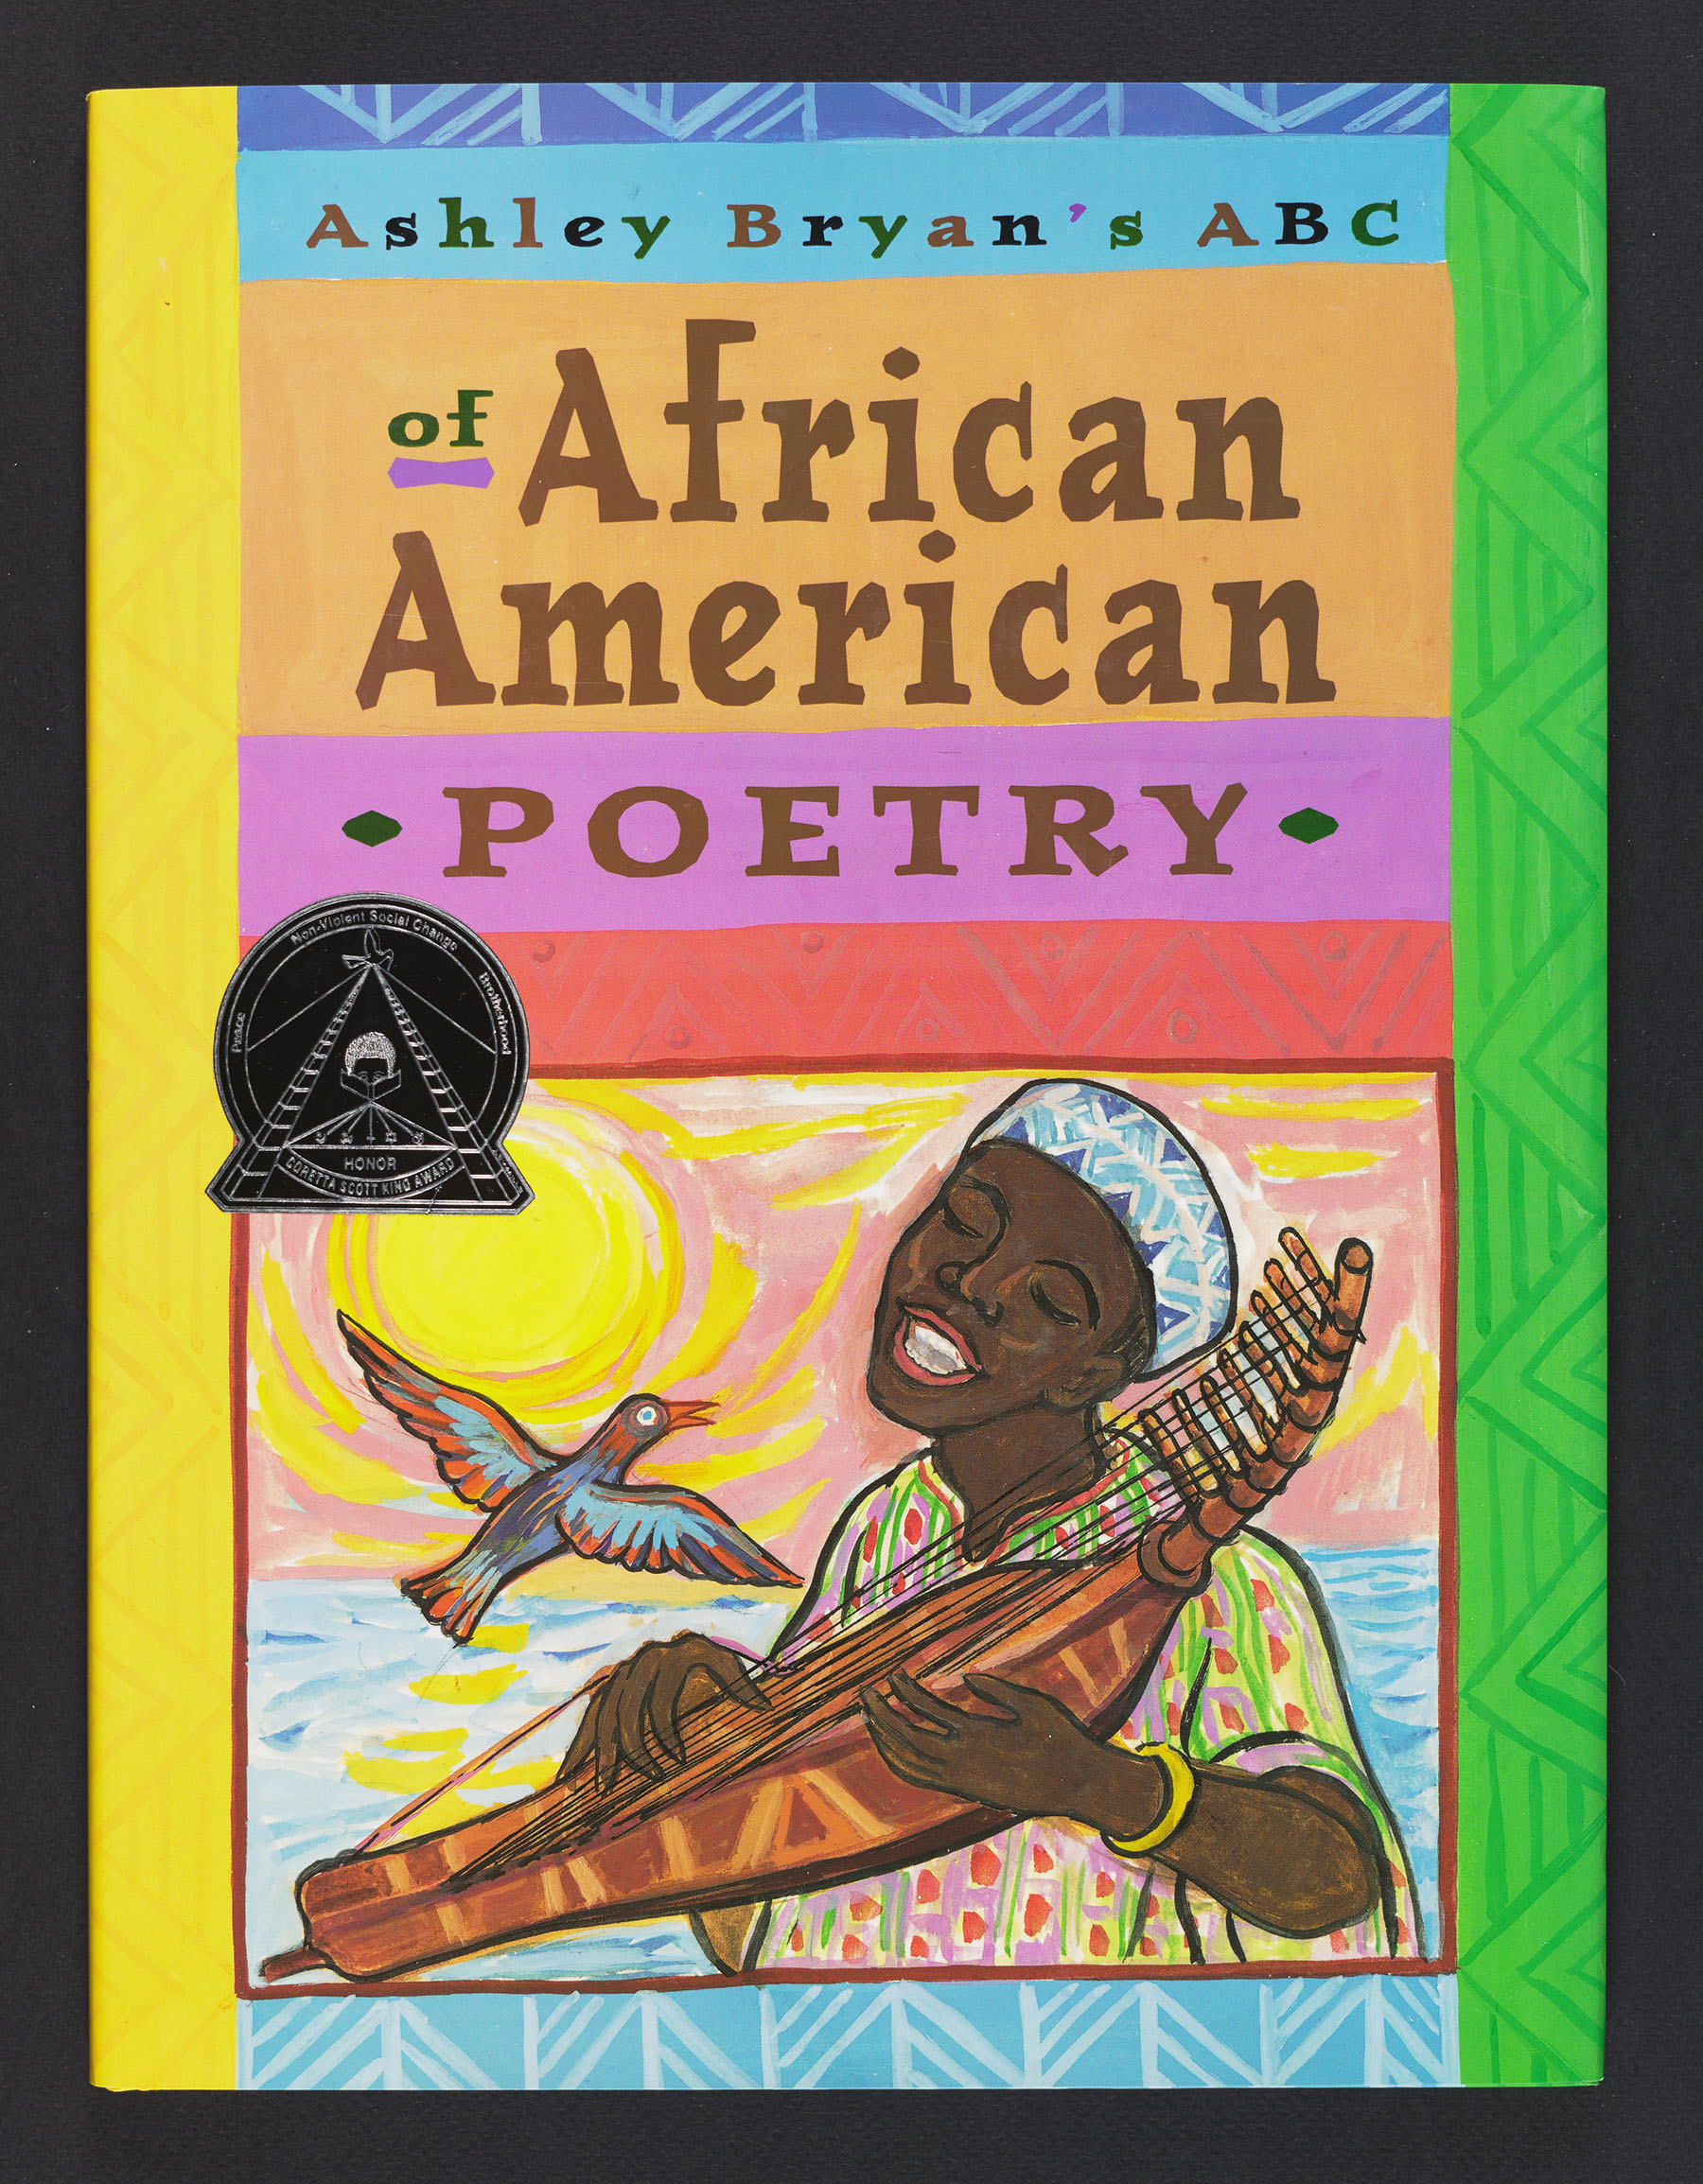 Cover art for Ashley Bryan's ABC of African American Poetry